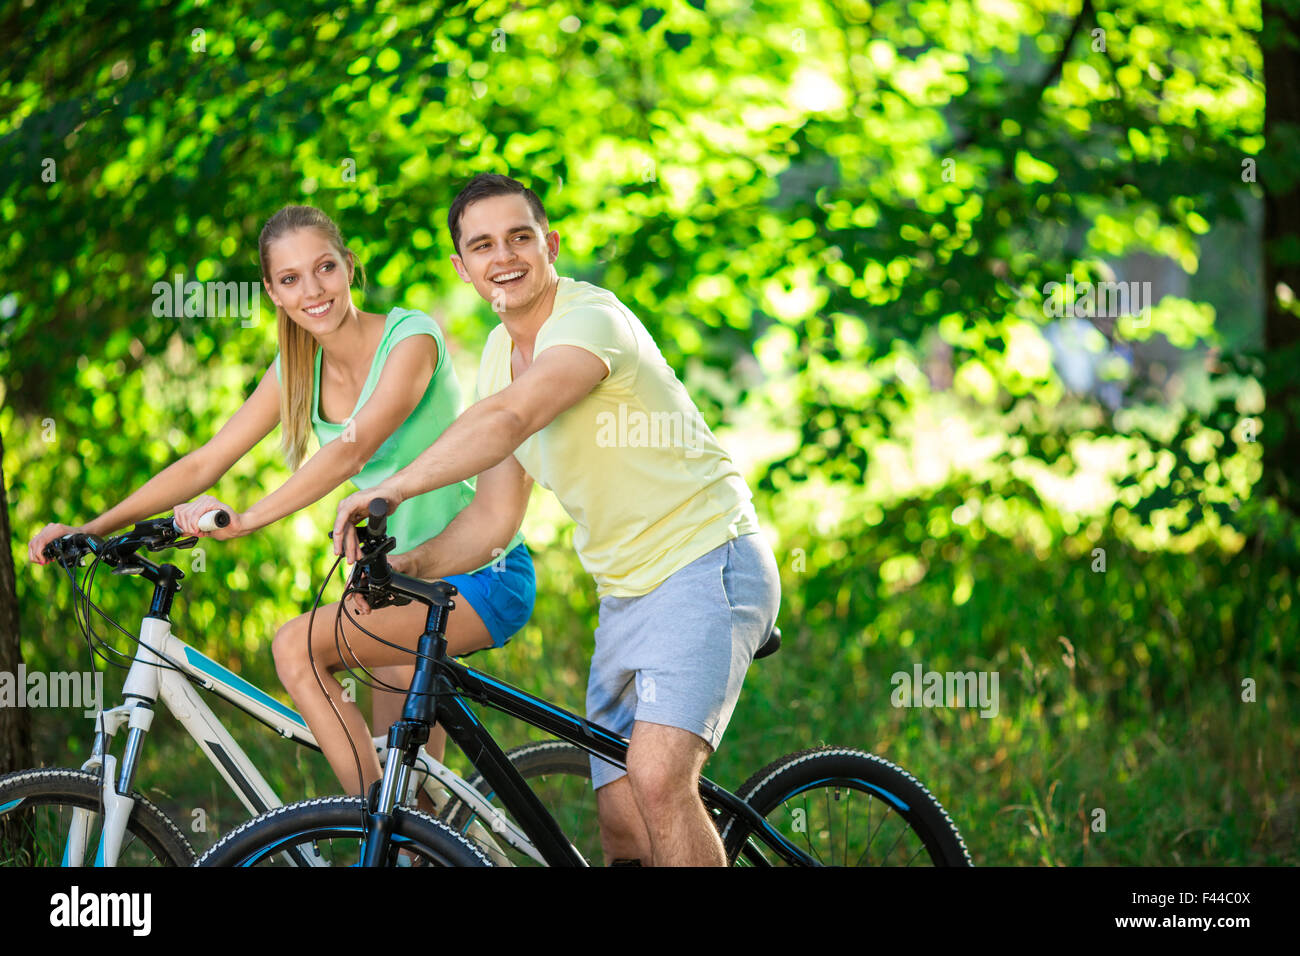 In the summer Stock Photo